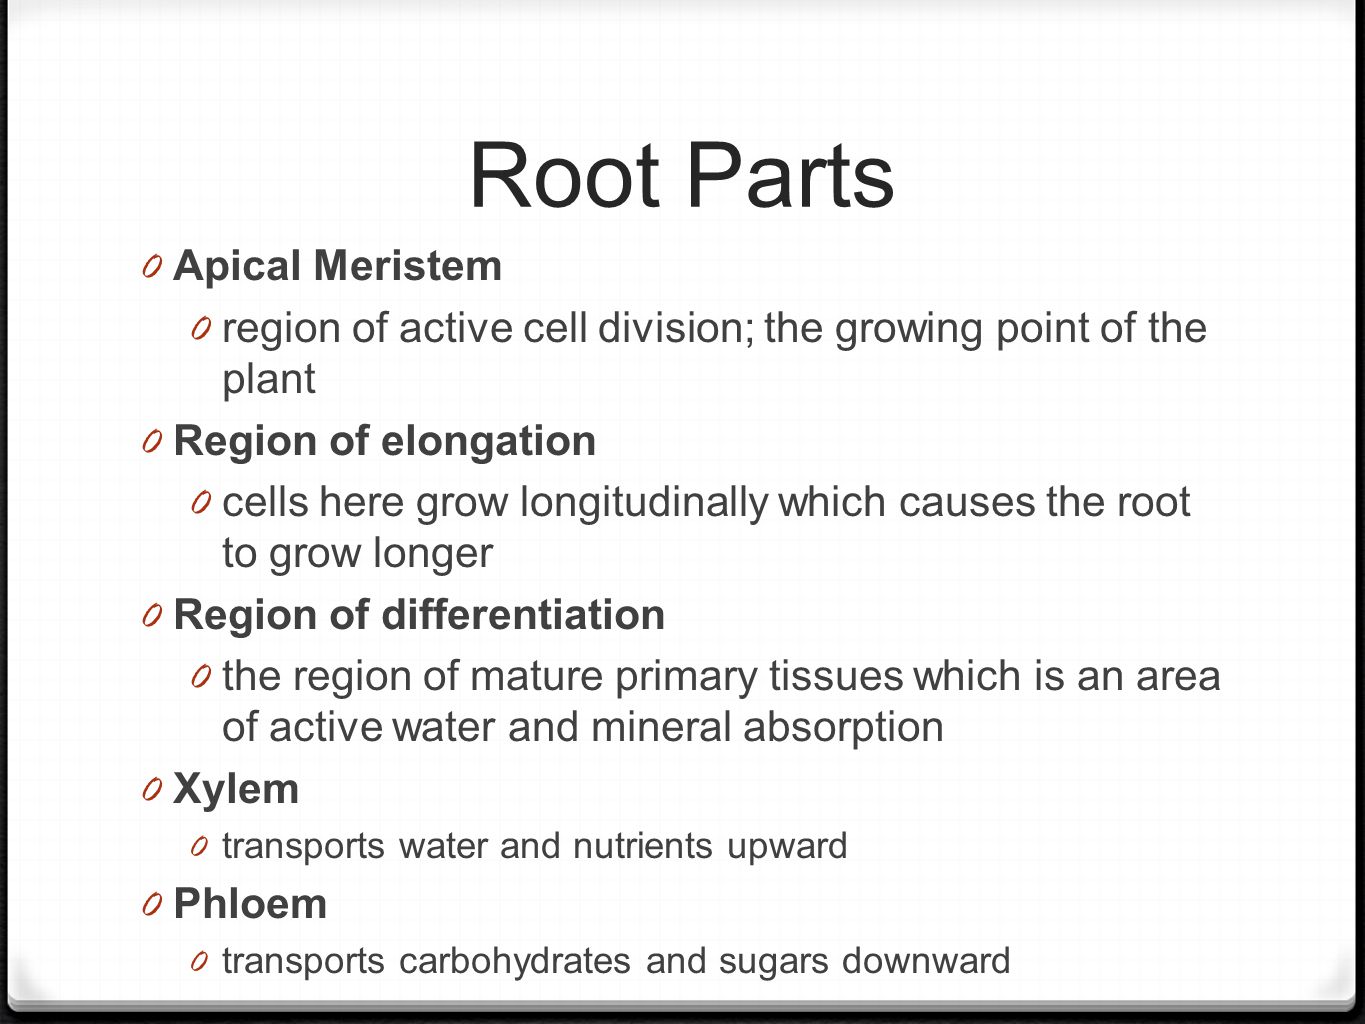 Root Parts 0 Apical Meristem 0 region of active cell division; the growing point of the plant 0 Region of elongation 0 cells here grow longitudinally which causes the root to grow longer 0 Region of differentiation 0 the region of mature primary tissues which is an area of active water and mineral absorption 0 Xylem 0 transports water and nutrients upward 0 Phloem 0 transports carbohydrates and sugars downward